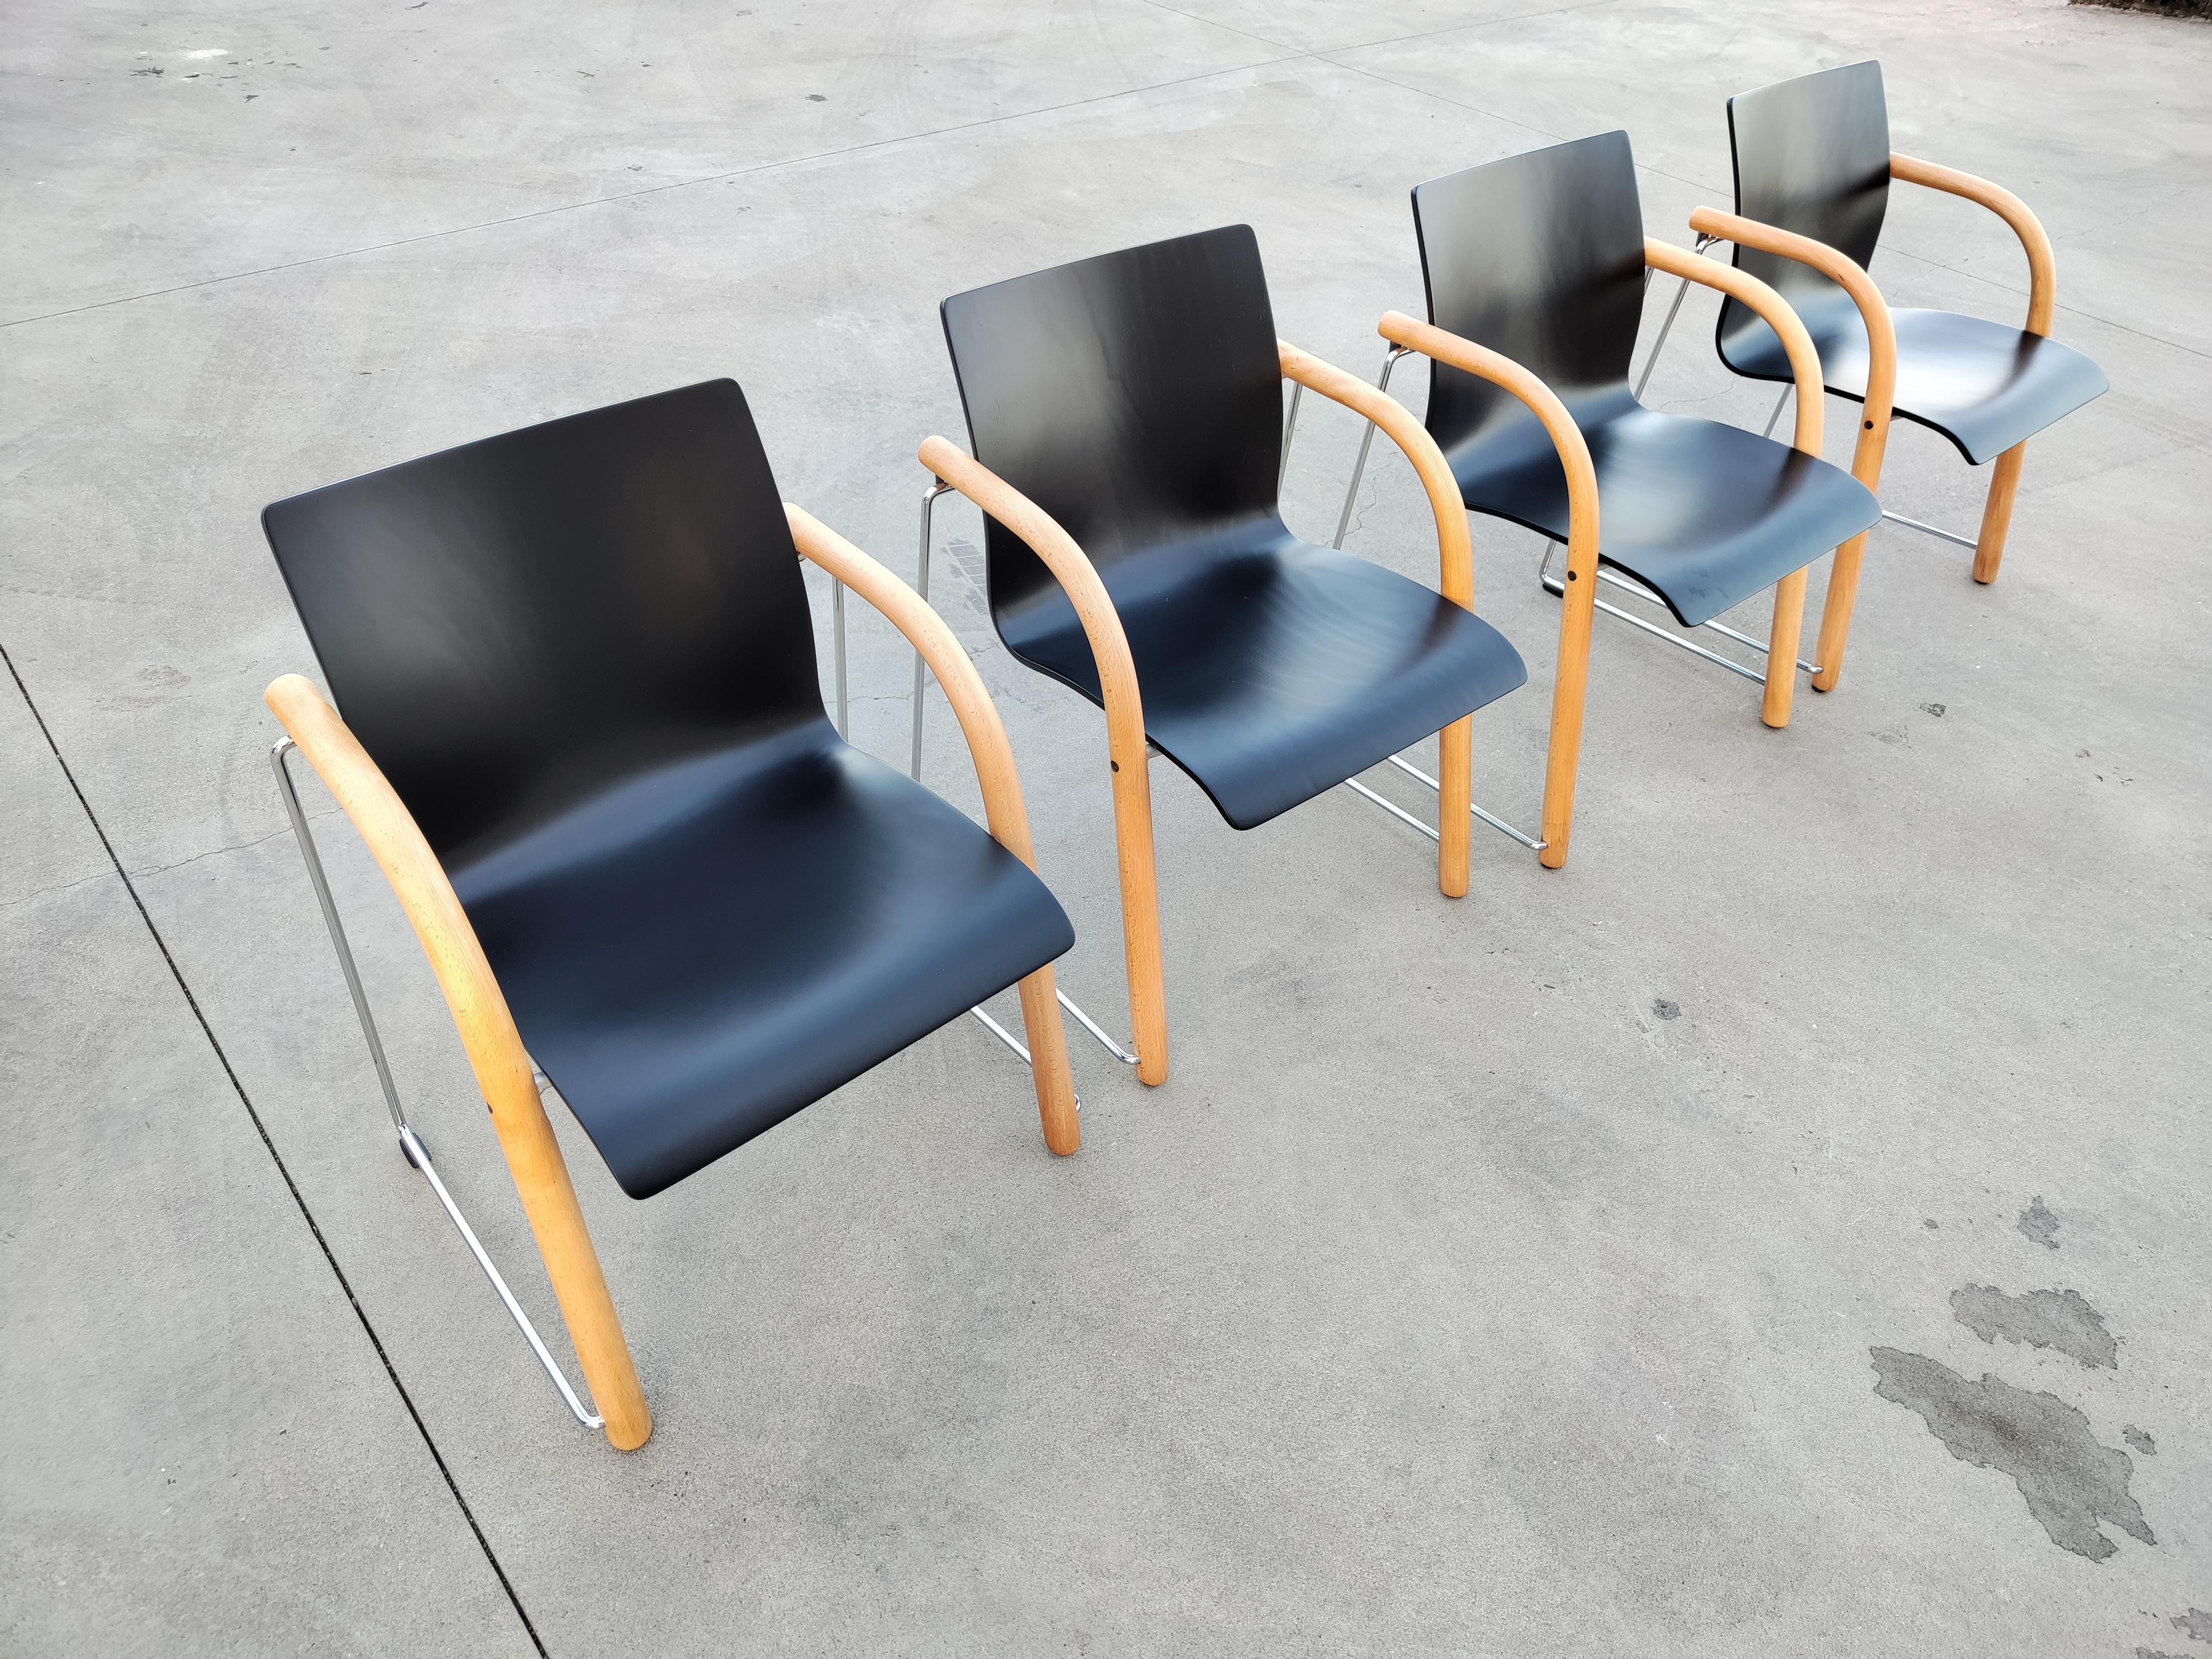 Refurbished Thonet Chairs 320 by Wulf Schneider and Ulrich Bohme, Austria 1984 For Sale 1